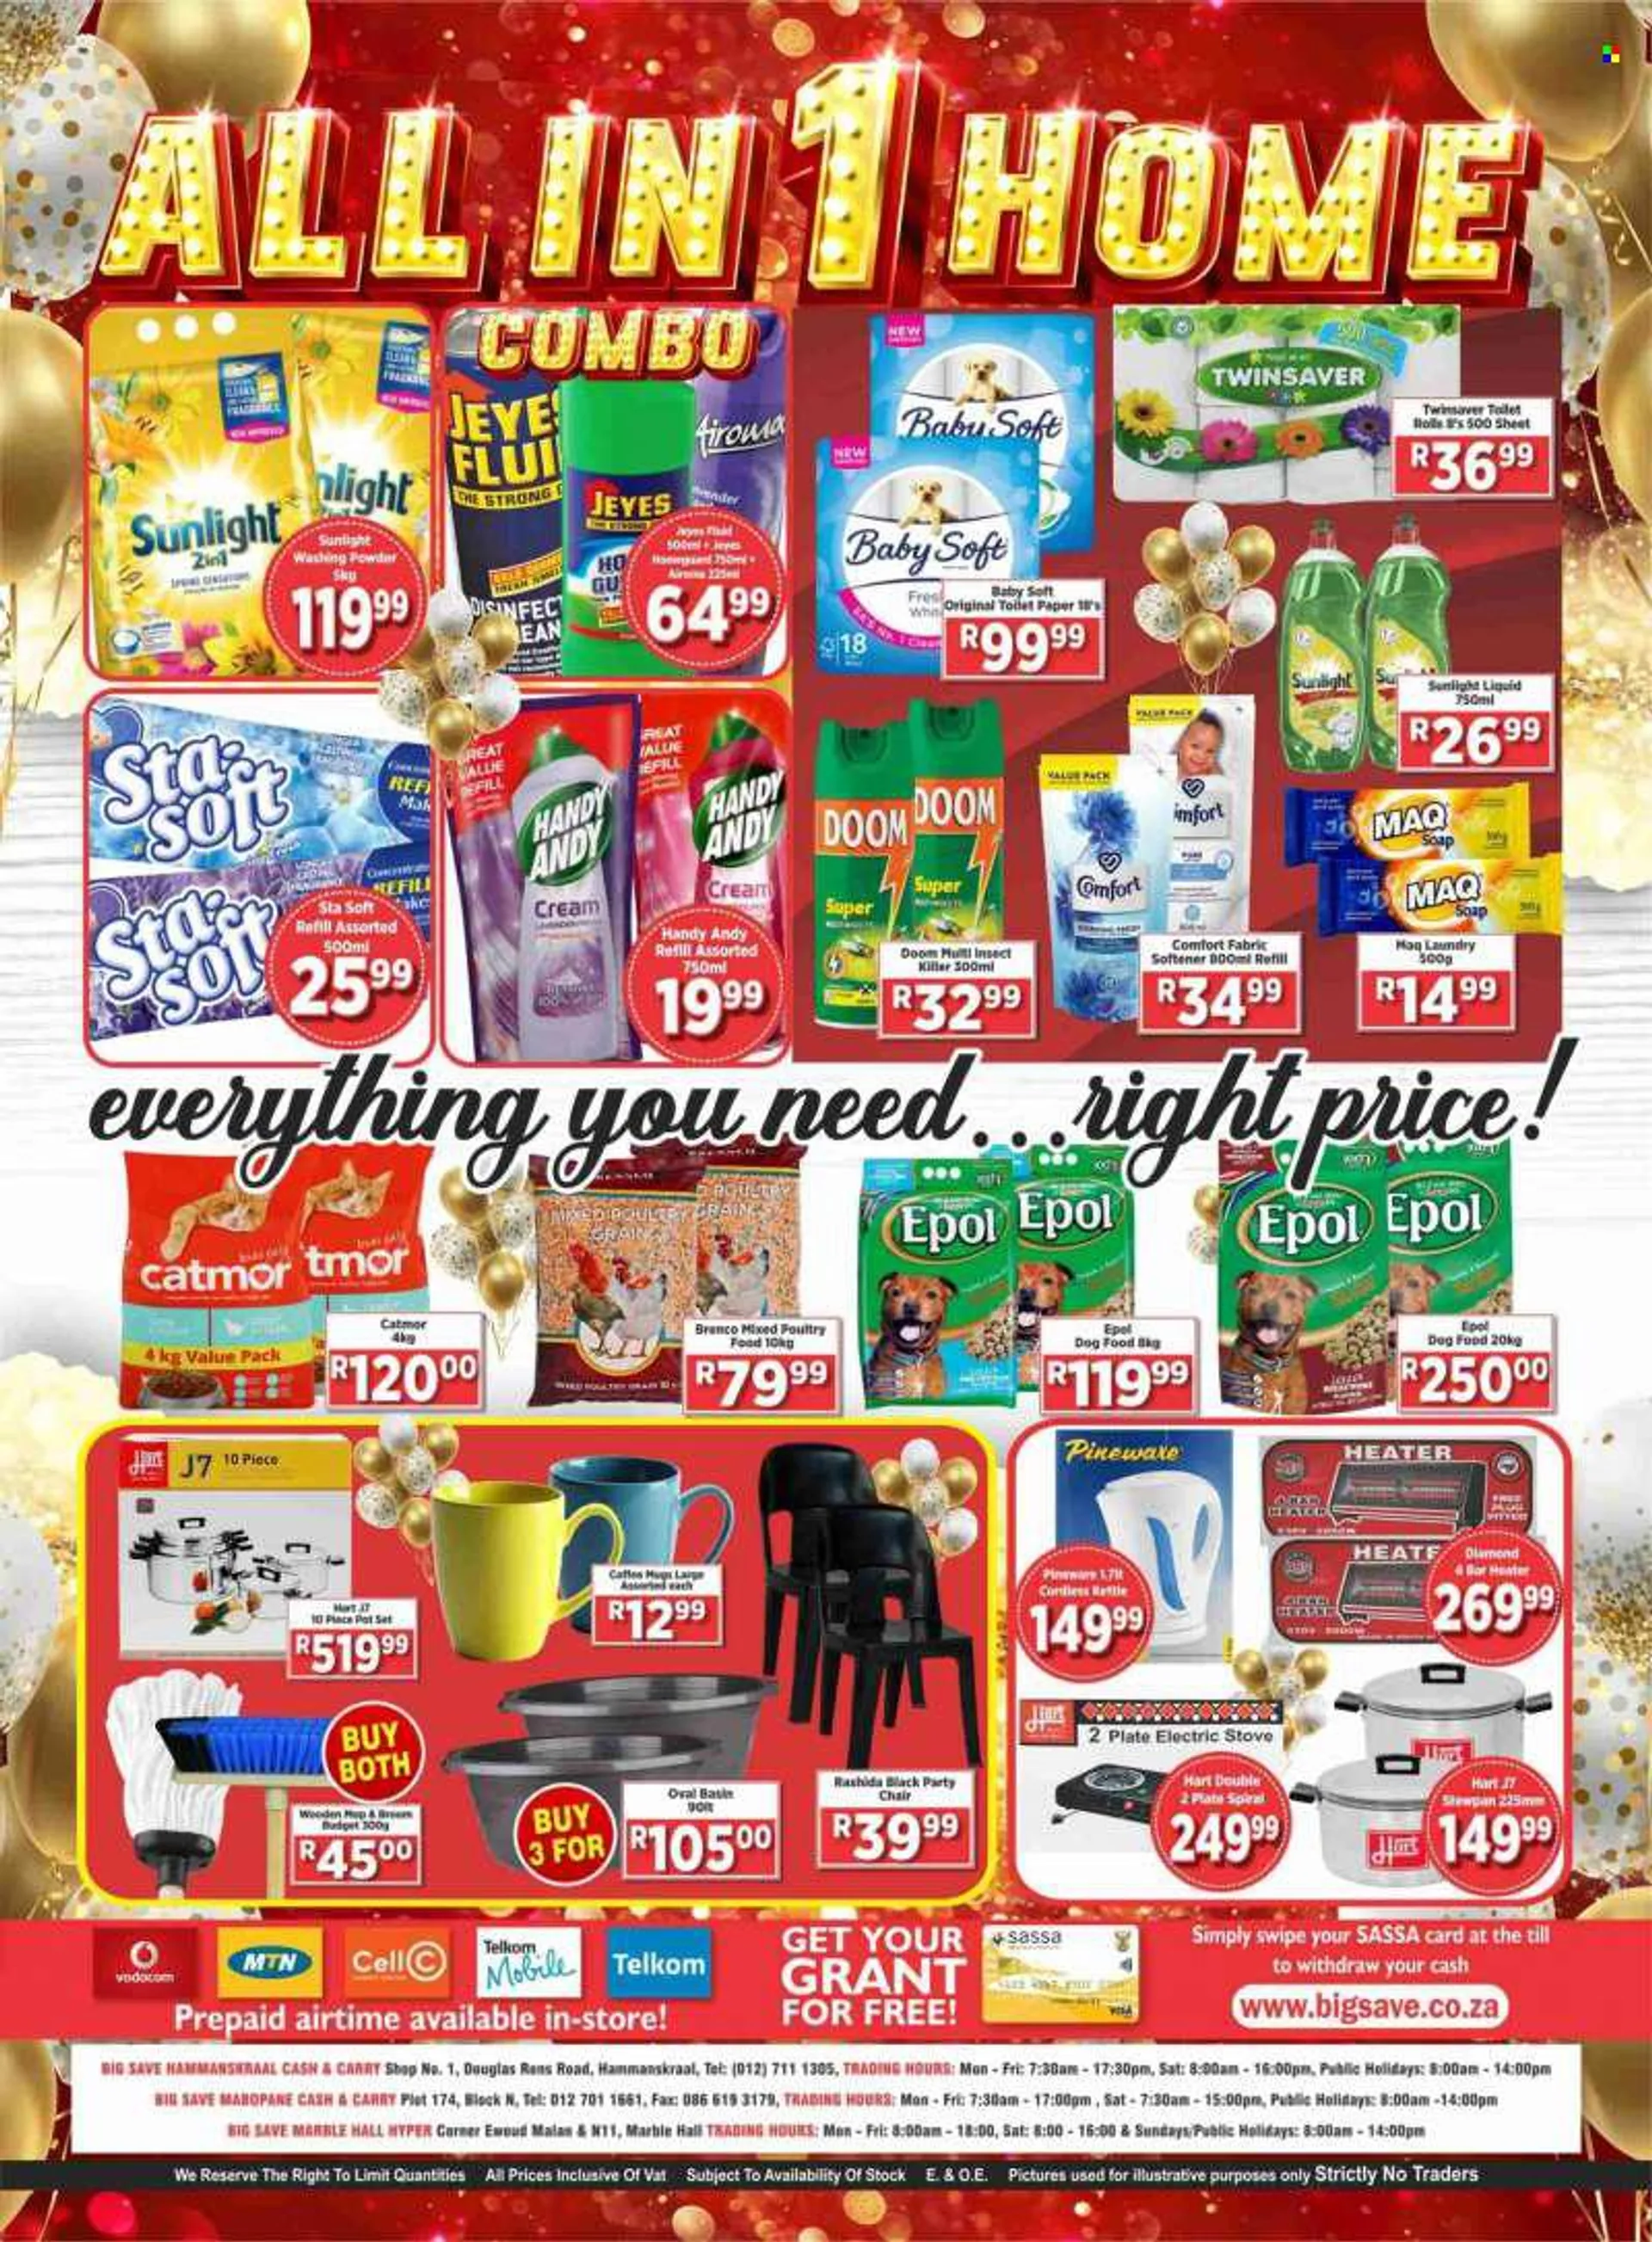 Big Save catalogue  - 28/06/2022 - 09/07/2022 - Sales products - kettle, coffee, Baby Soft, toilet paper, fabric softener, laundry powder, Sunlight, Comfort softener, soap, conditioner, fragrance, insect killer, mop, broom, pot, plate, pot set, animal foo